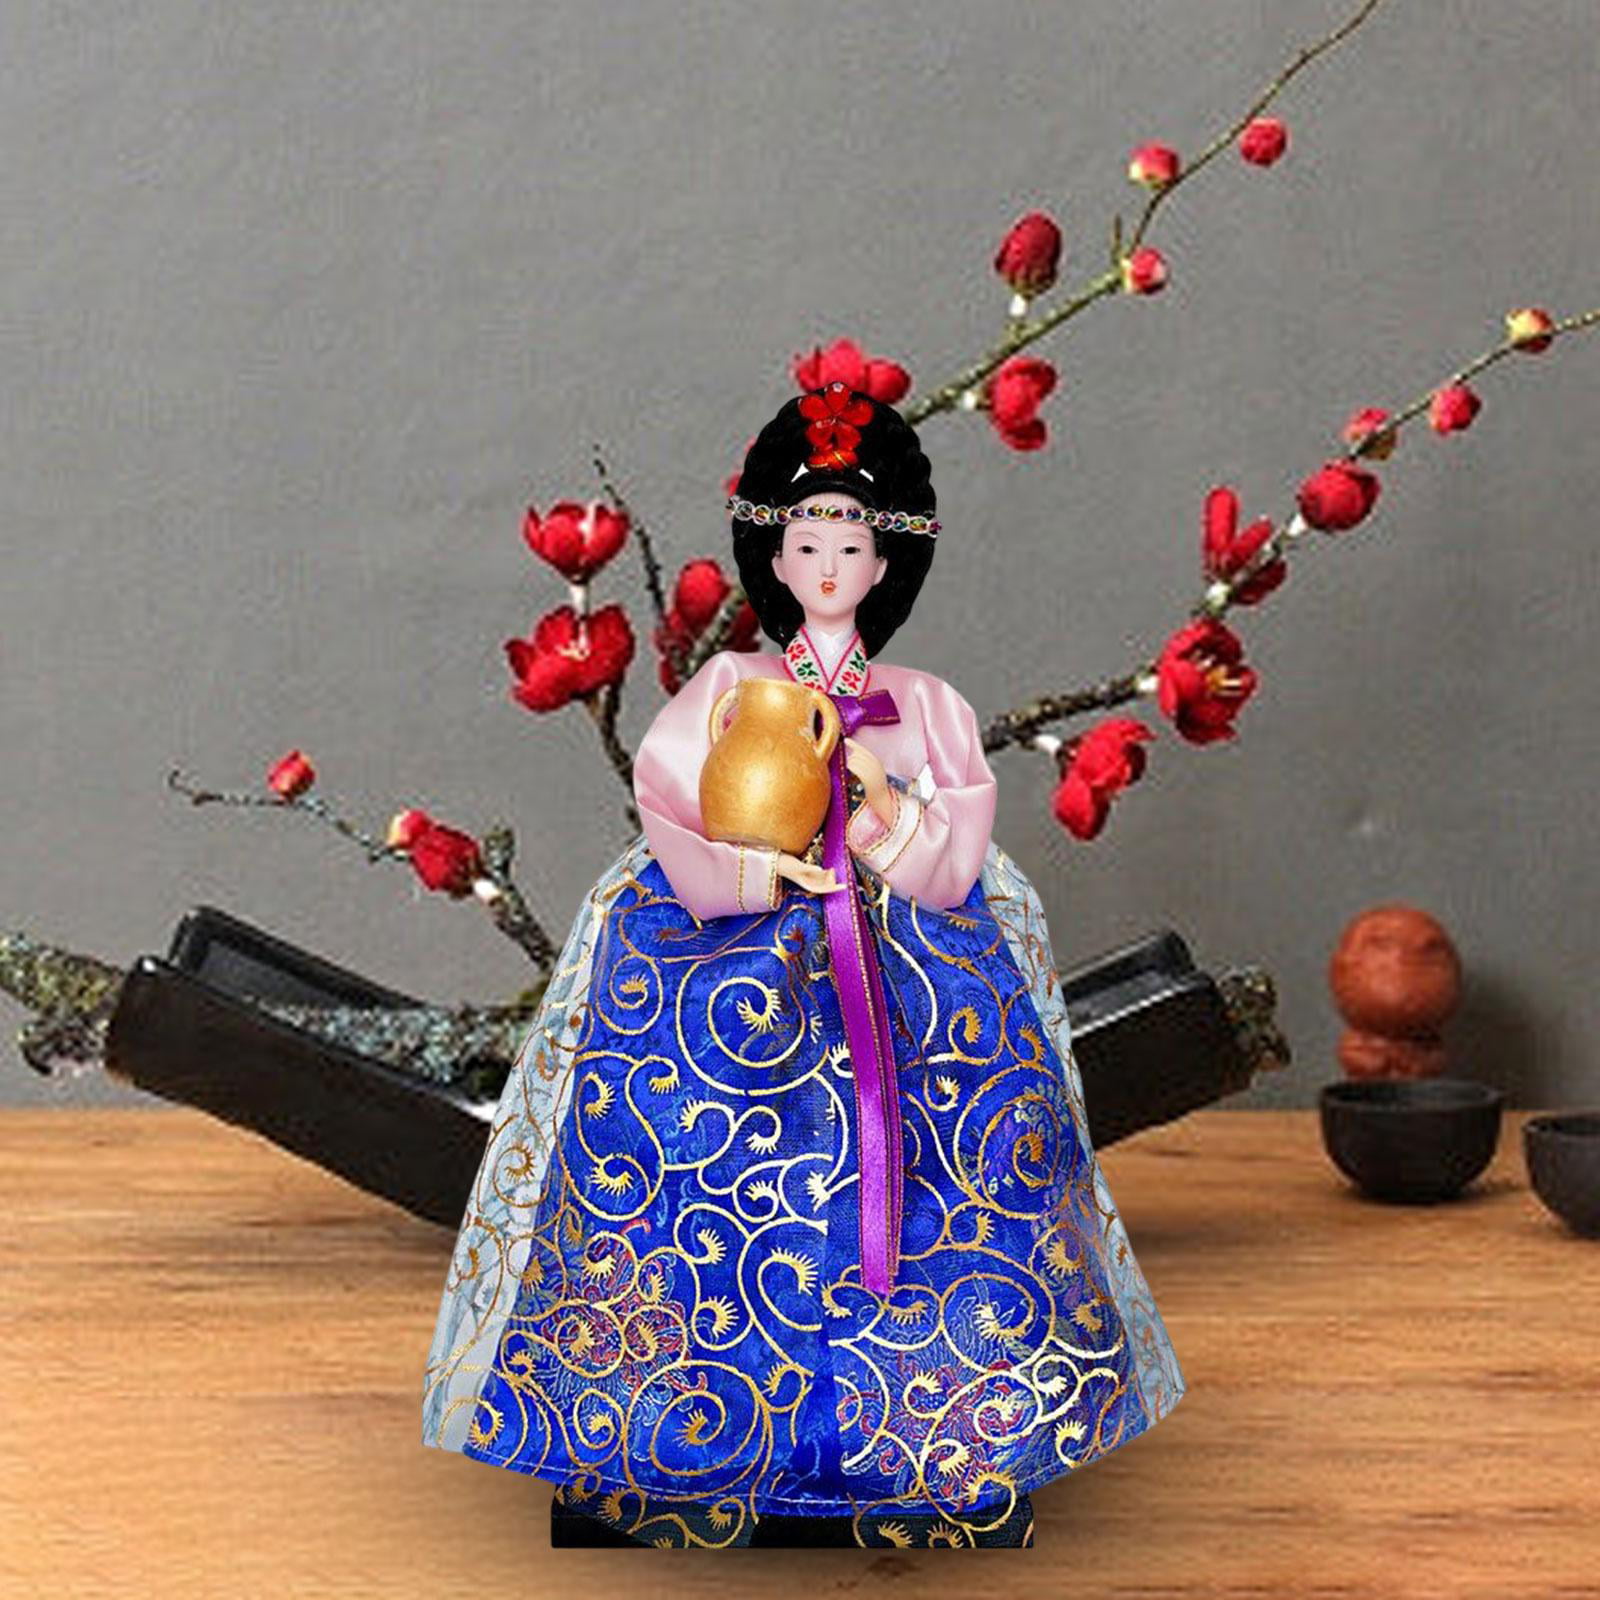 Totority Table top Decor Tabletop Decor Decorations for Home Korean Decor  Home Decorations Desk top Decor Hand Decor Desktop Decor Korean Hanbok Doll